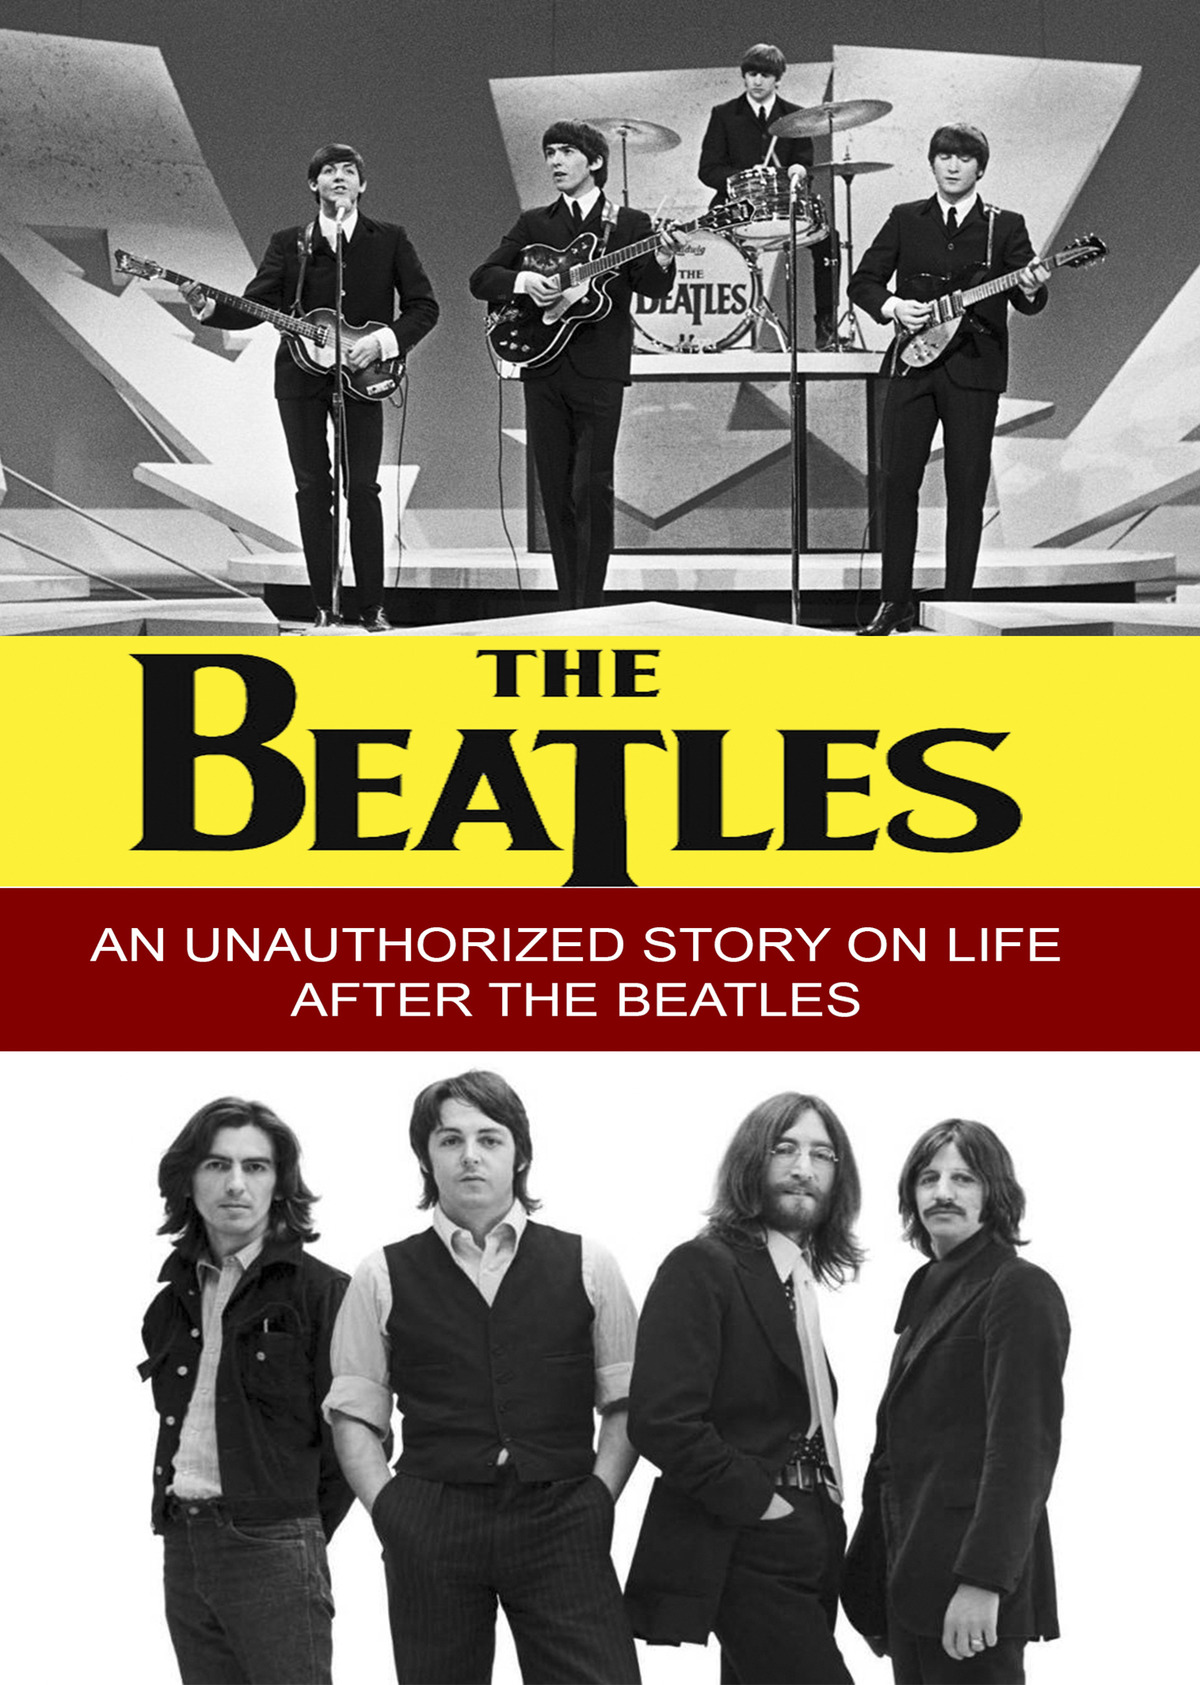 L7826 - The Beatles - An Unauthorized Story on Life after the Beatles